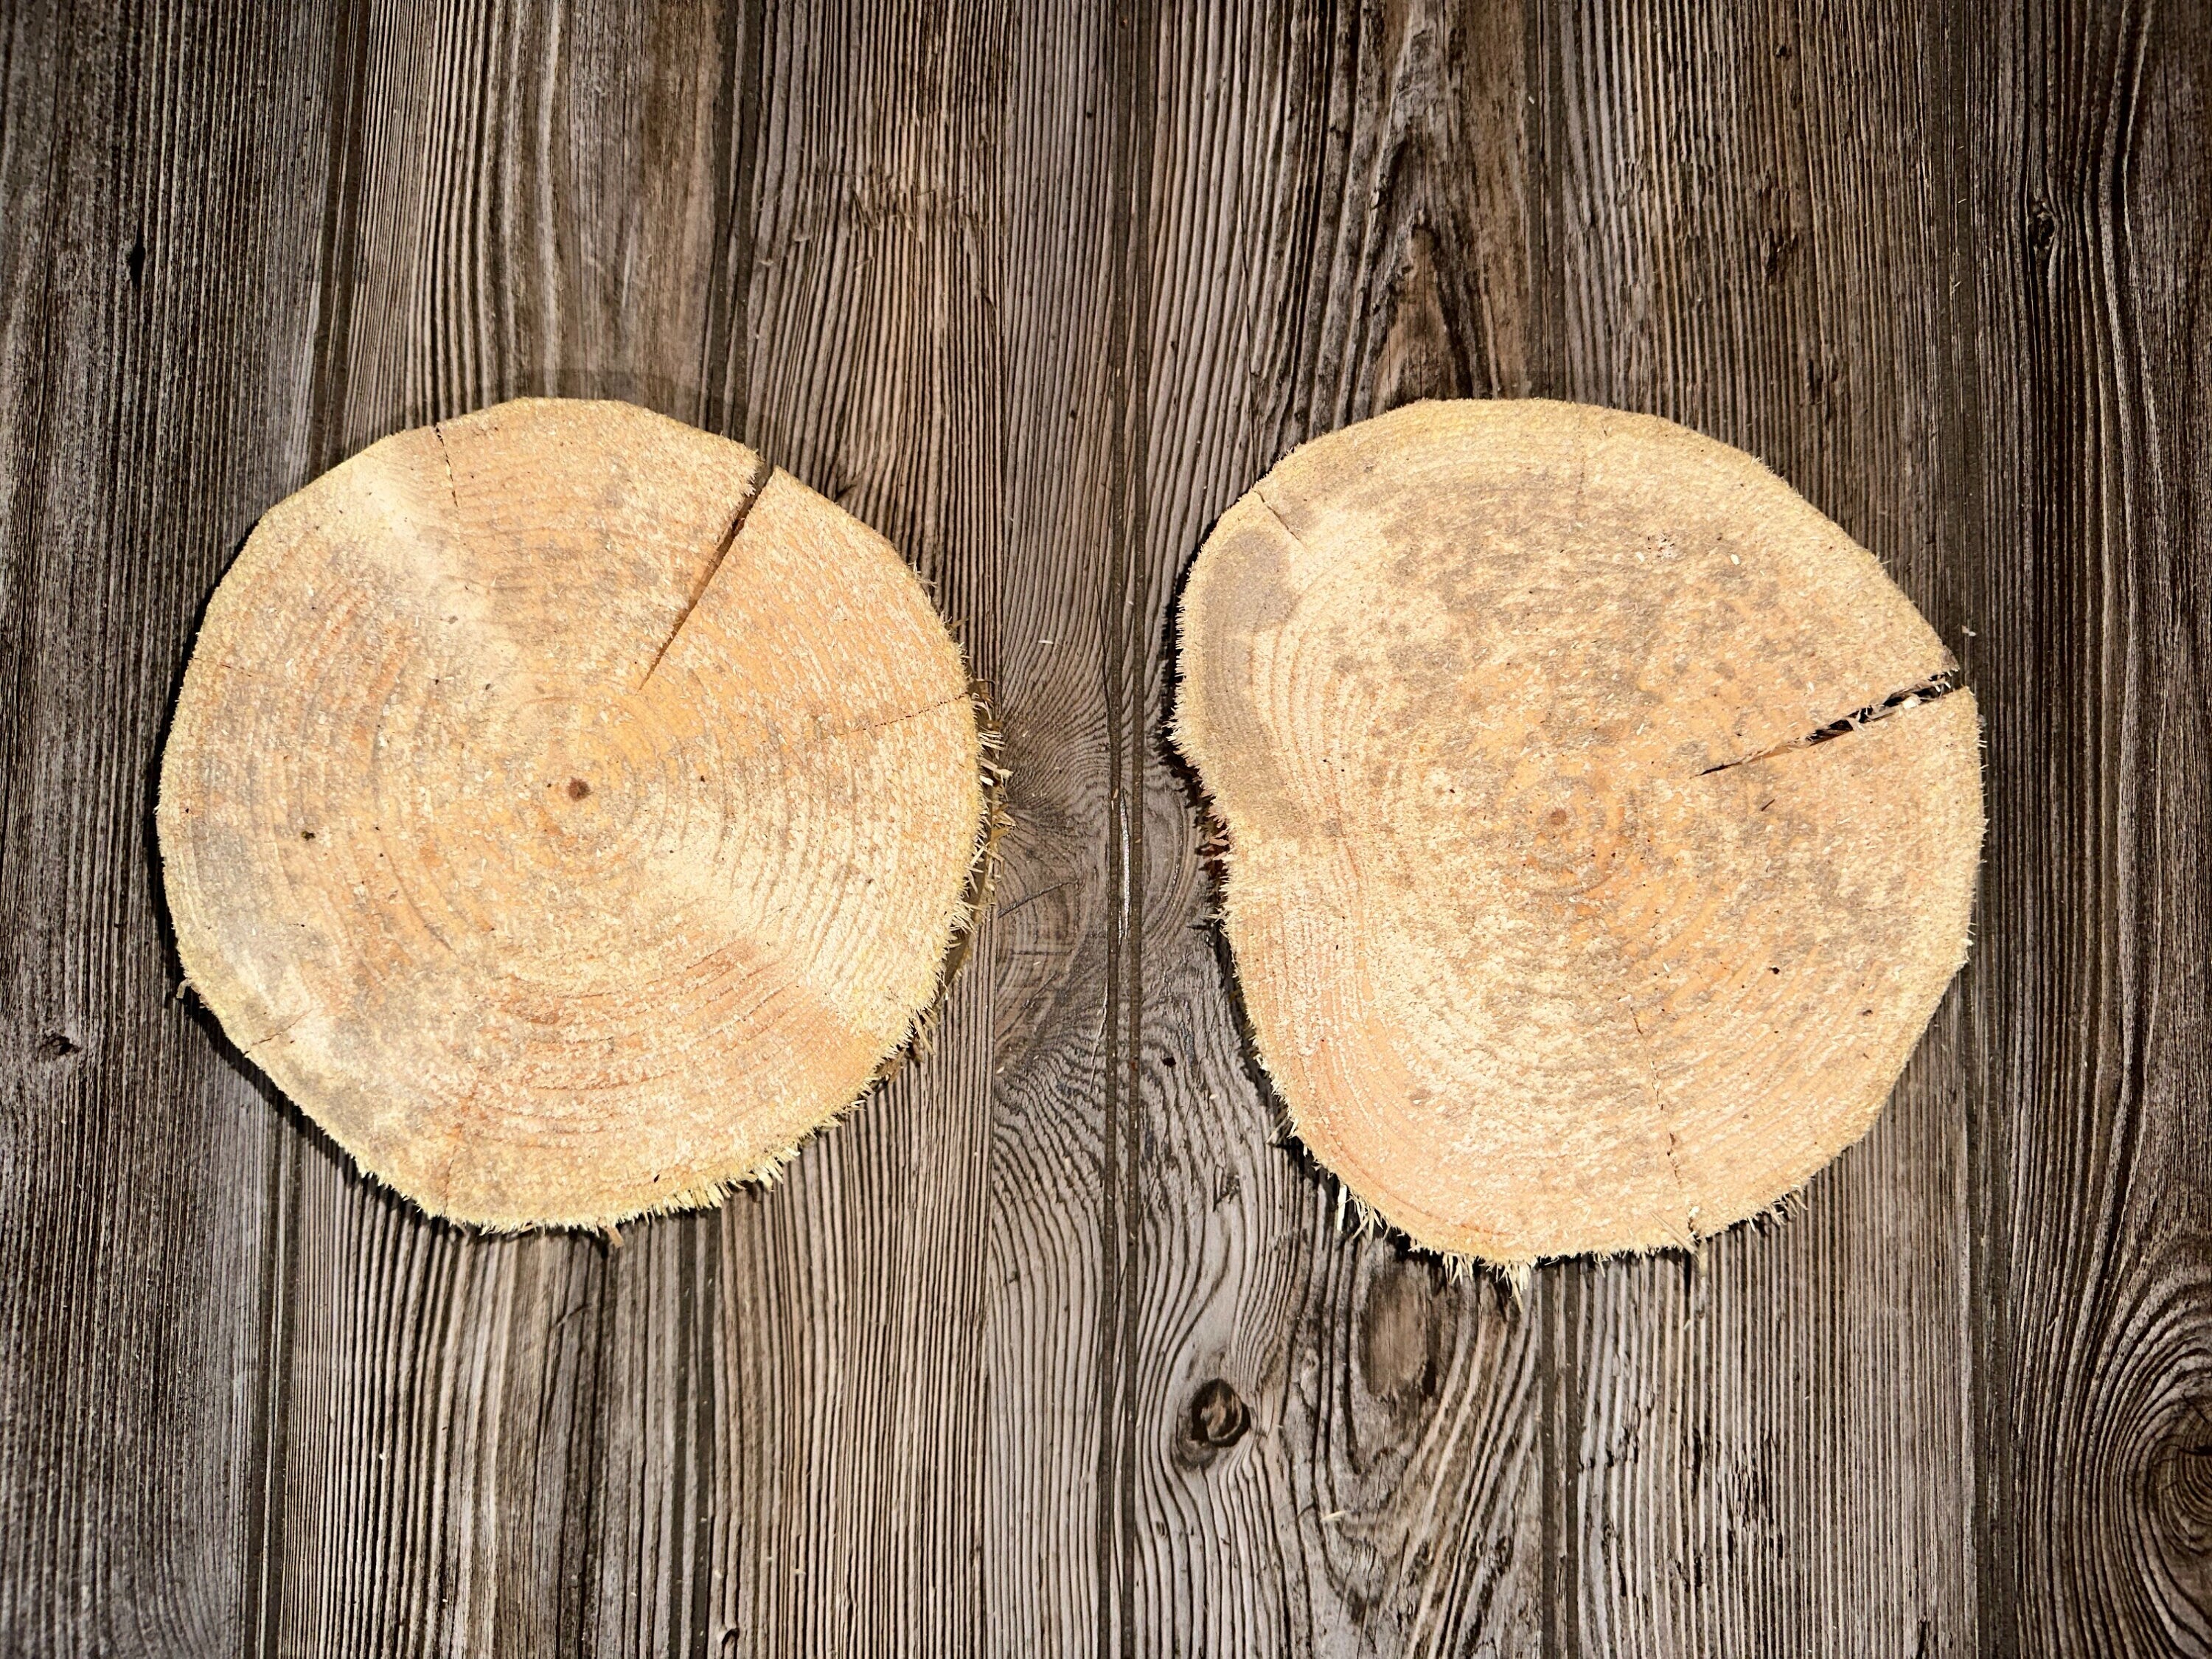 Pine Tree Slices, Two Pine Slices, Approximately 7 Inches Long by 6-6.5 Inches Wide and 2 Inches Tall